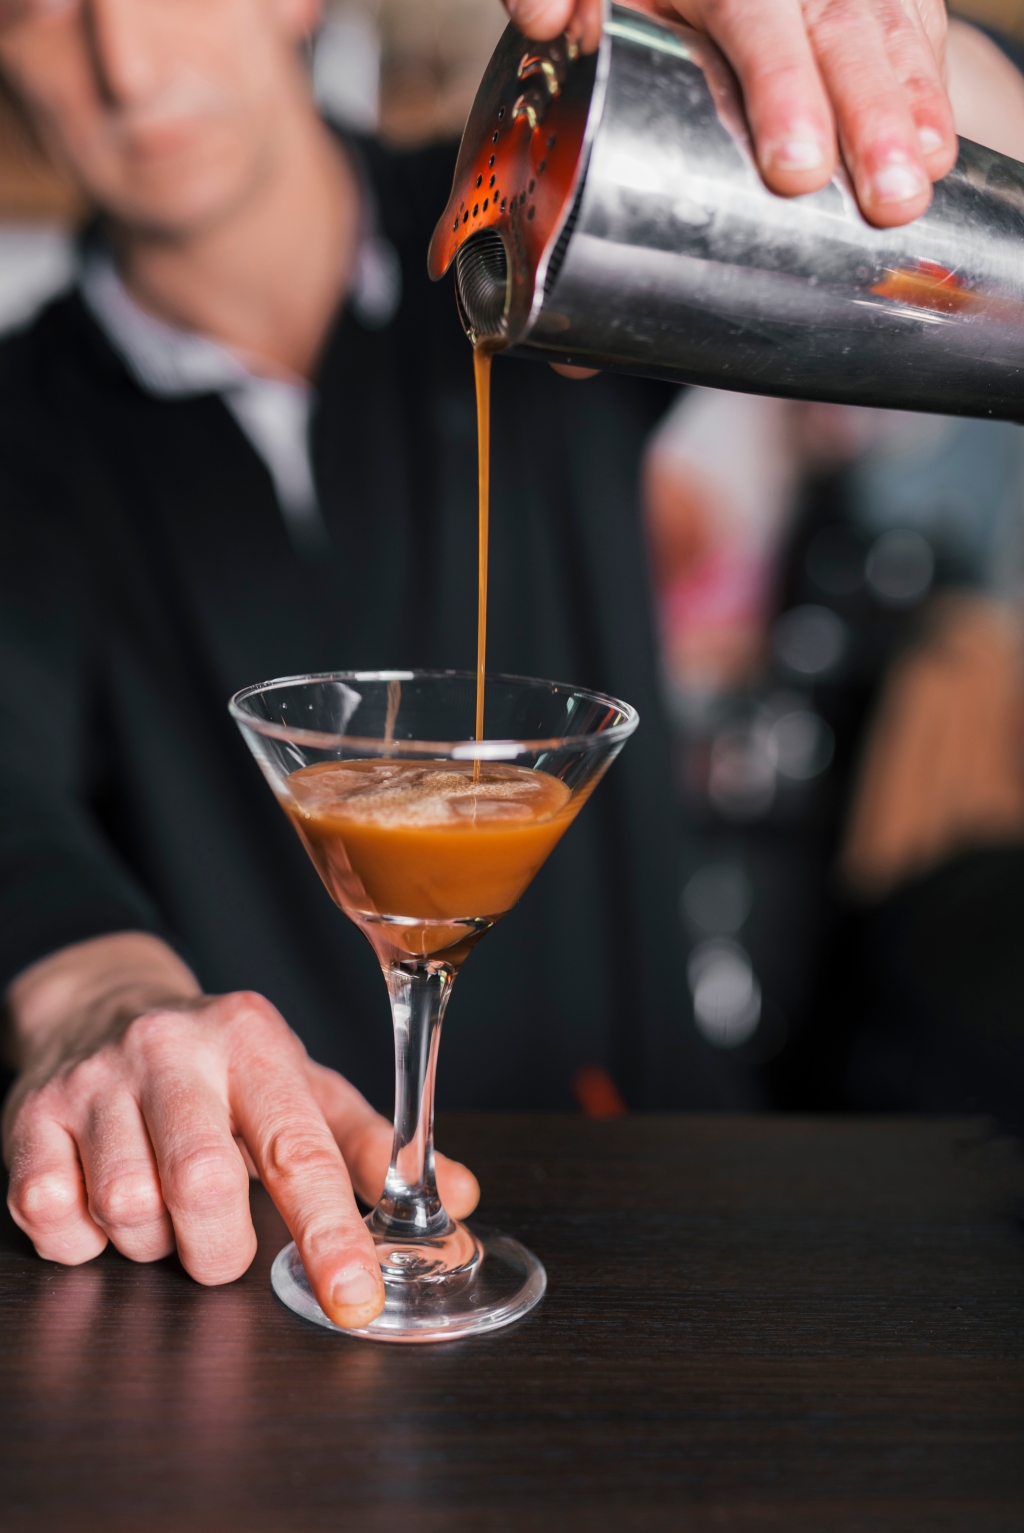 How to hire temporary bartenders in minutes.